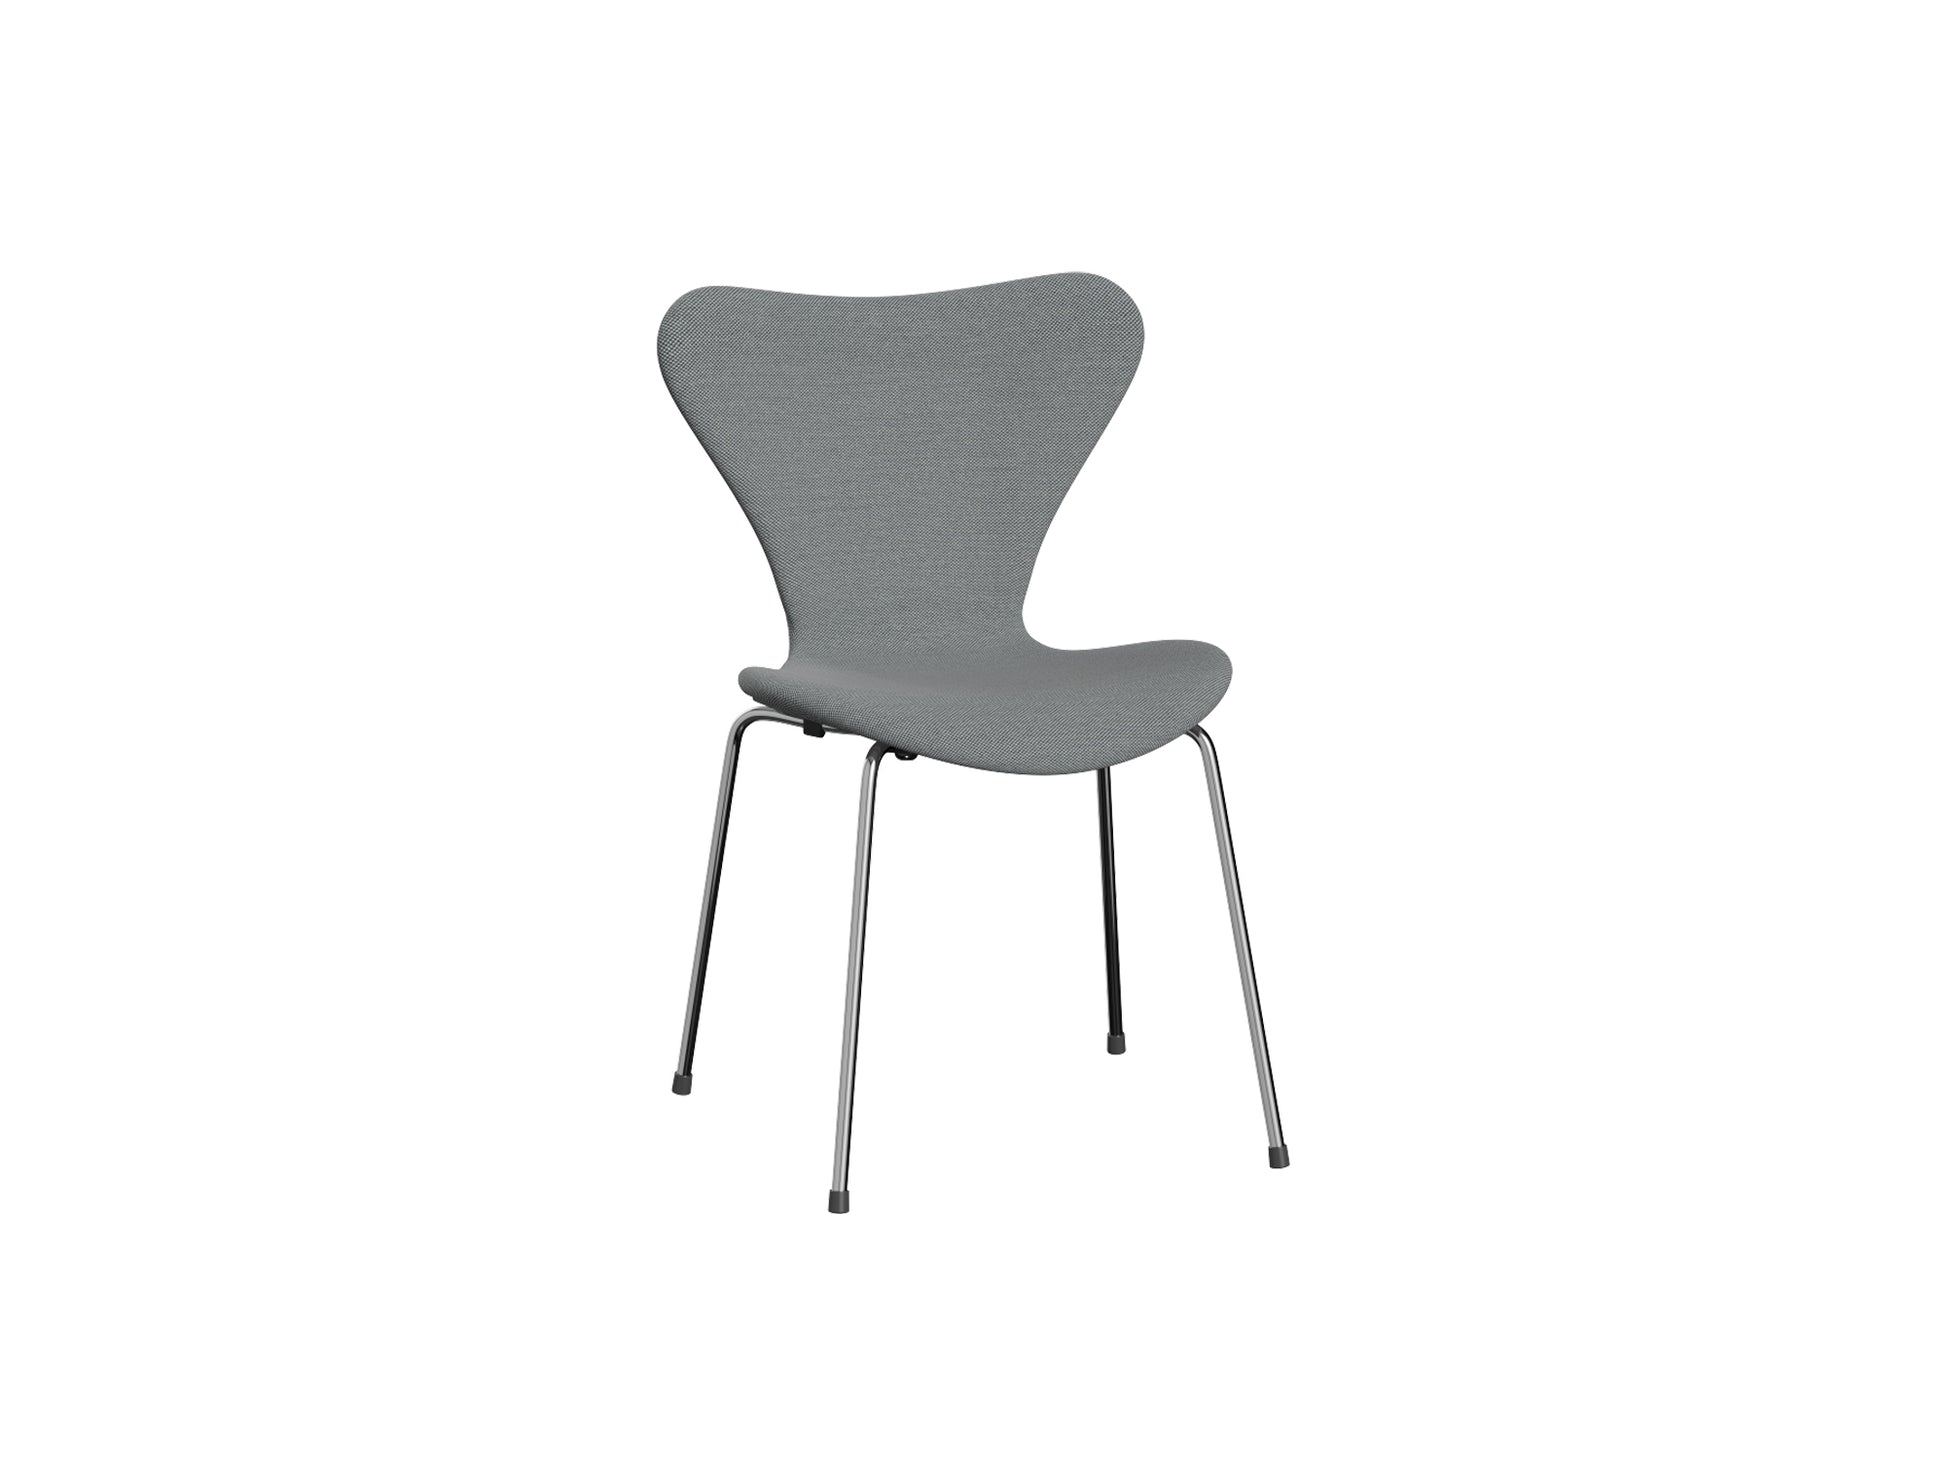 Series 7™ 3107 Dining Chair (Fully Upholstered) by Fritz Hansen - Chromed Steel / Steelcut Trio 3 133